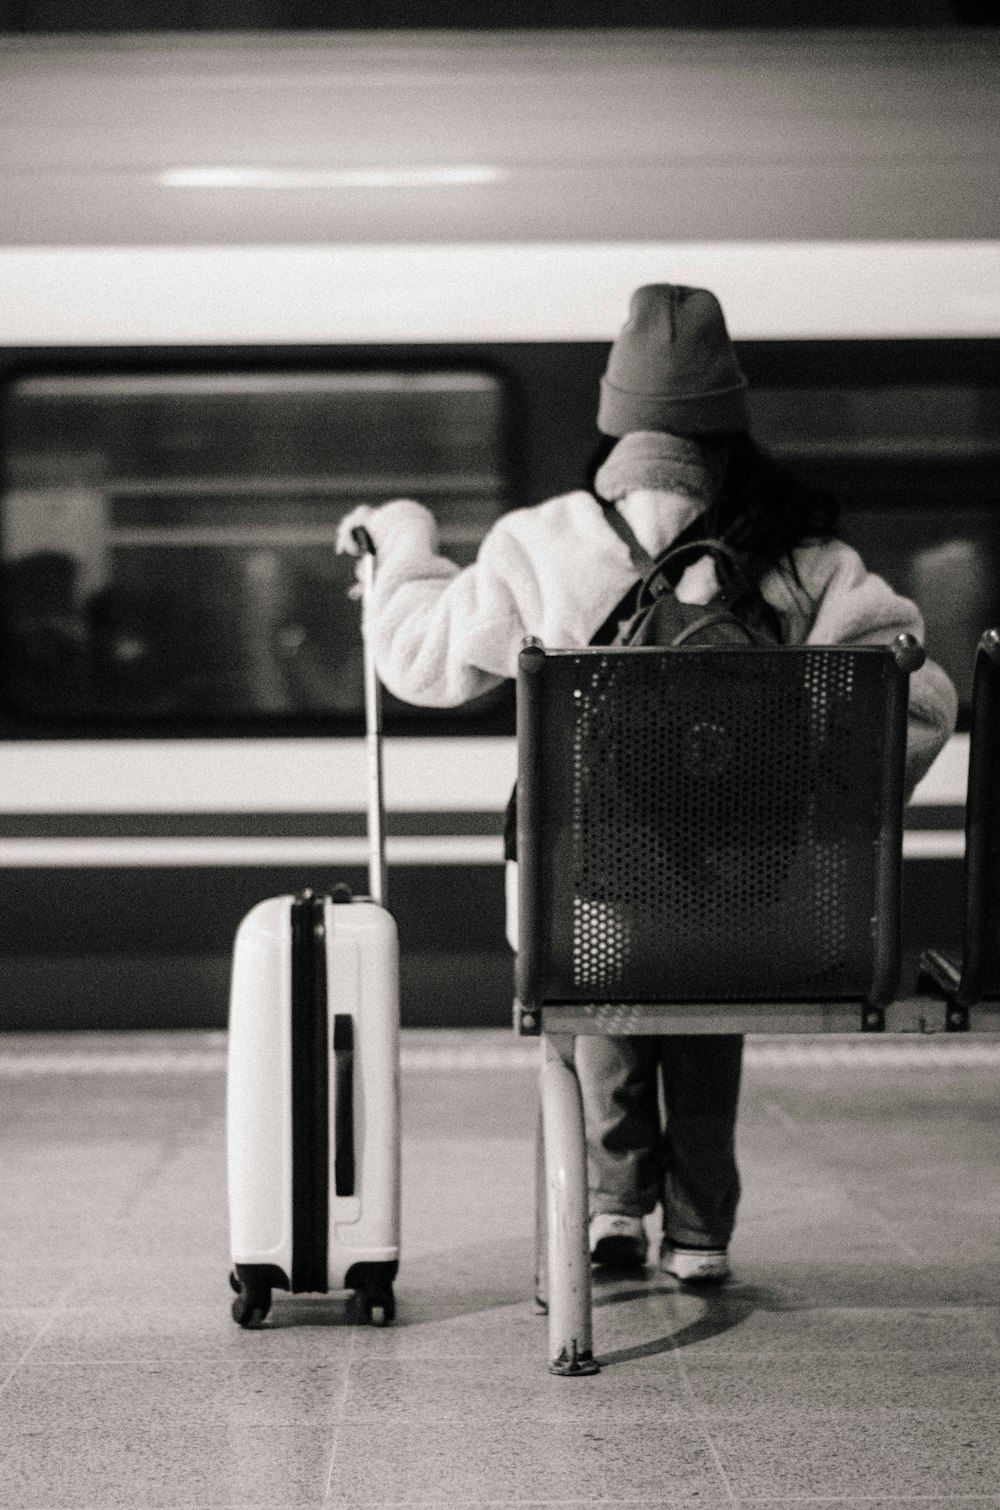 a person with a suitcase and a bag waiting for a train